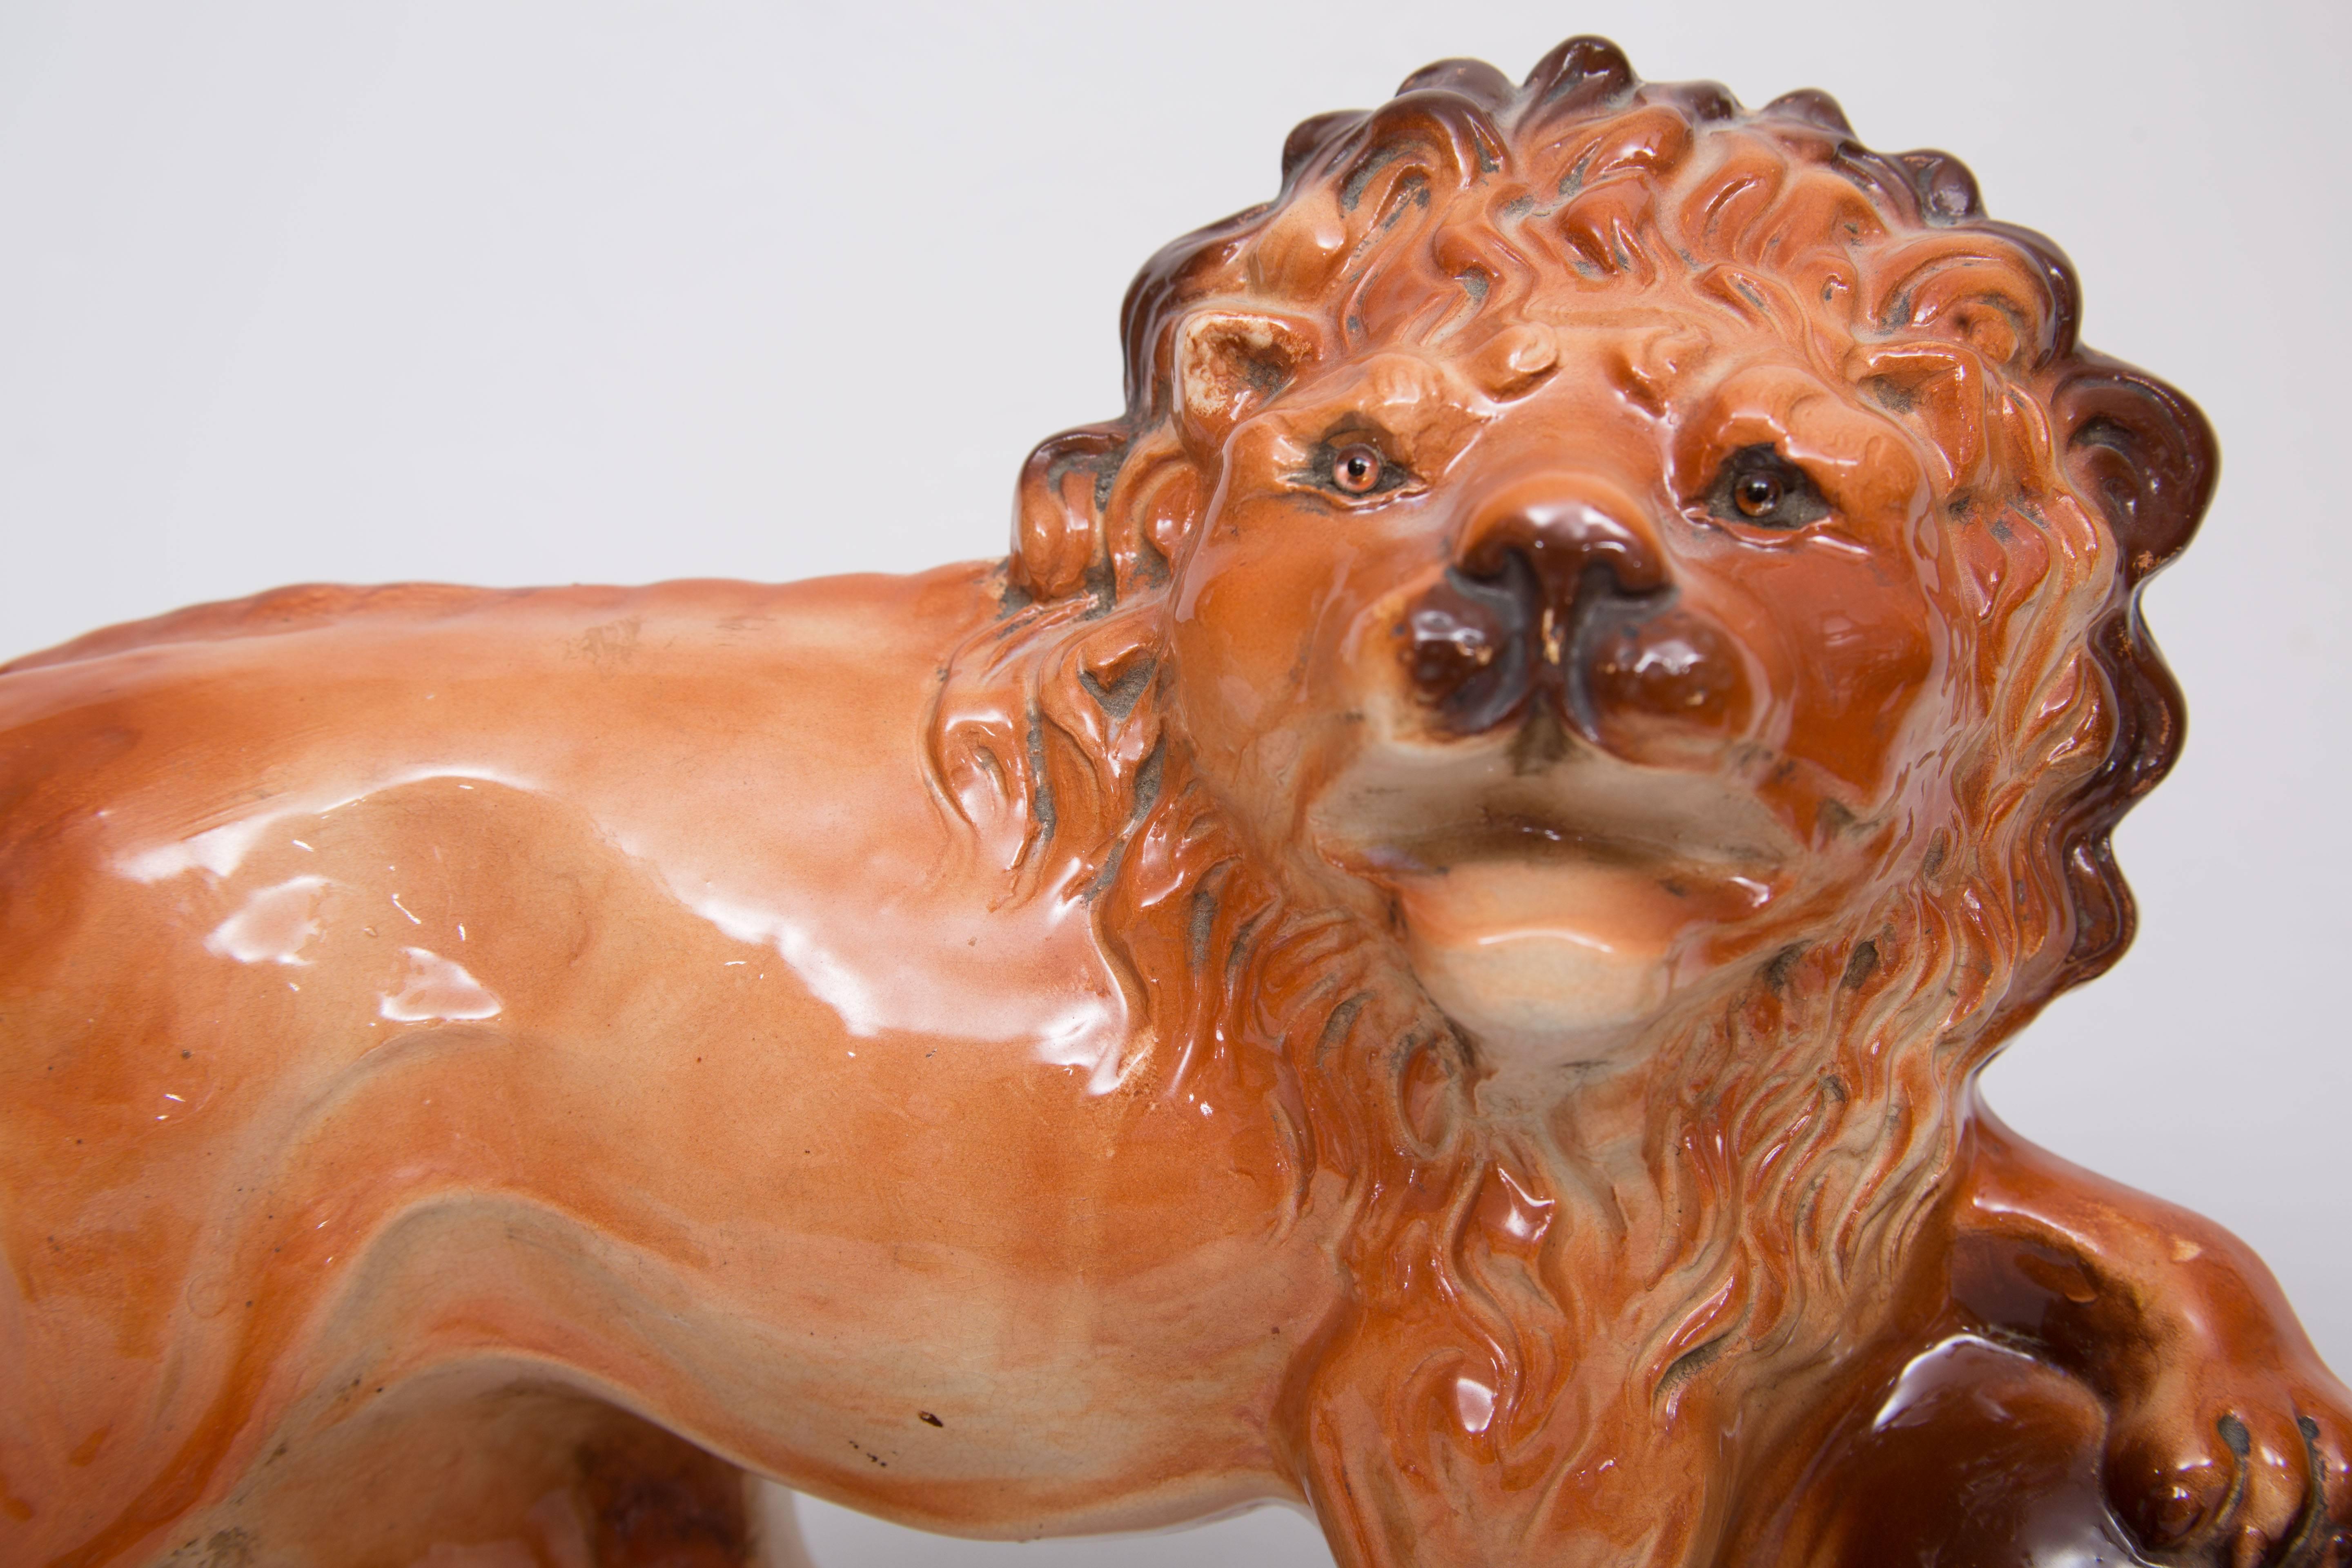 Other Pair of Ceramic and Glazed Lions by Lancaster & Sons (Hanley) Ltd (L&S)